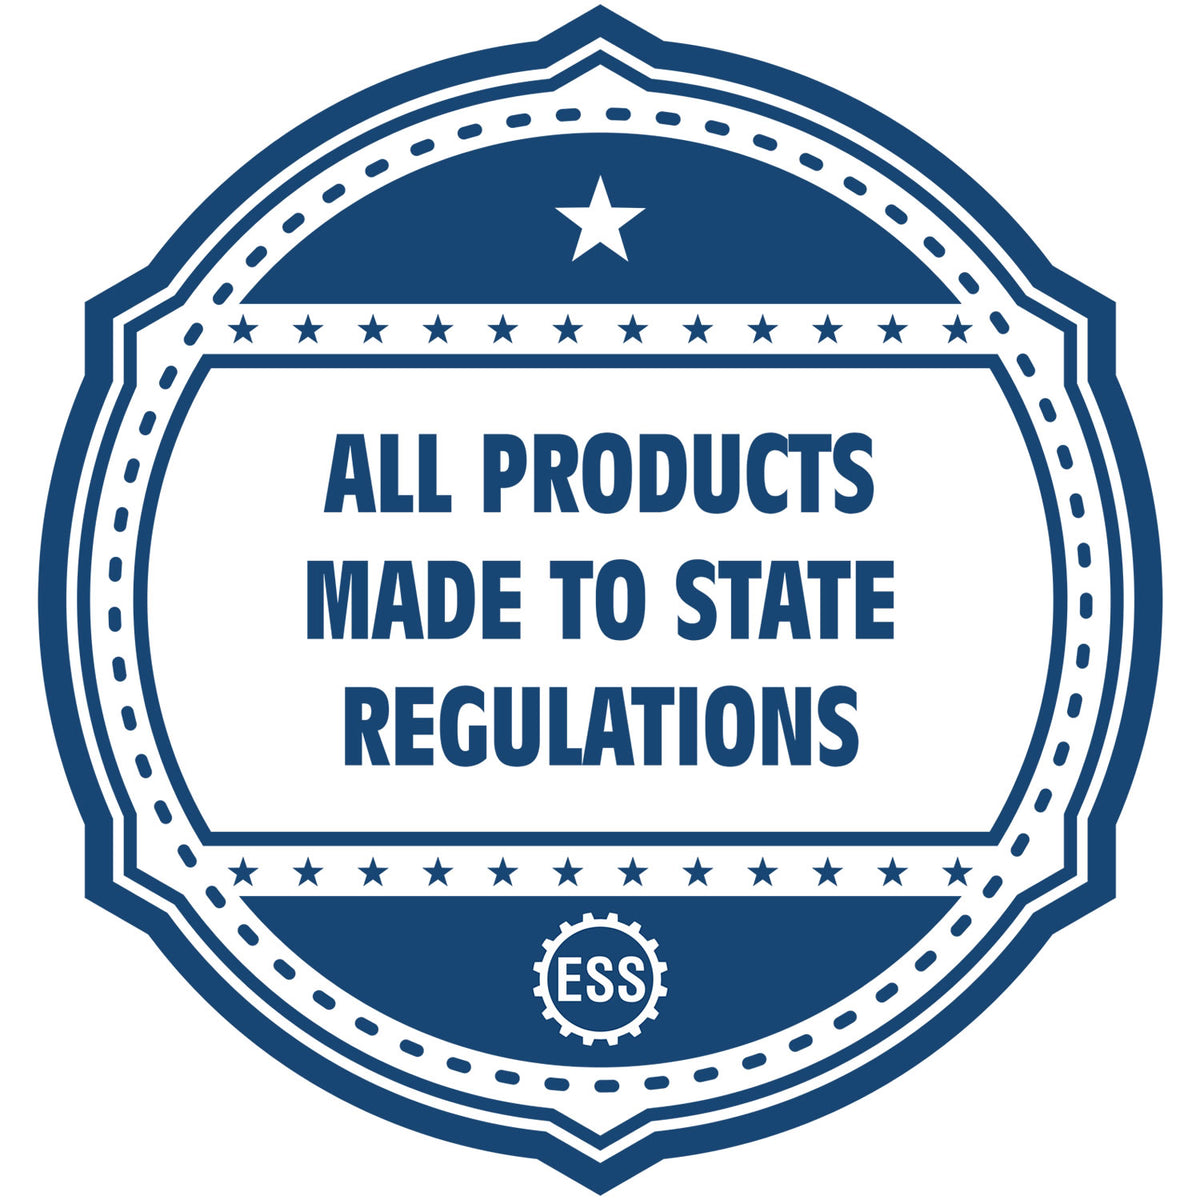 An icon or badge element for the Slim Pre-Inked Delaware Architect Seal Stamp showing that this product is made in compliance with state regulations.